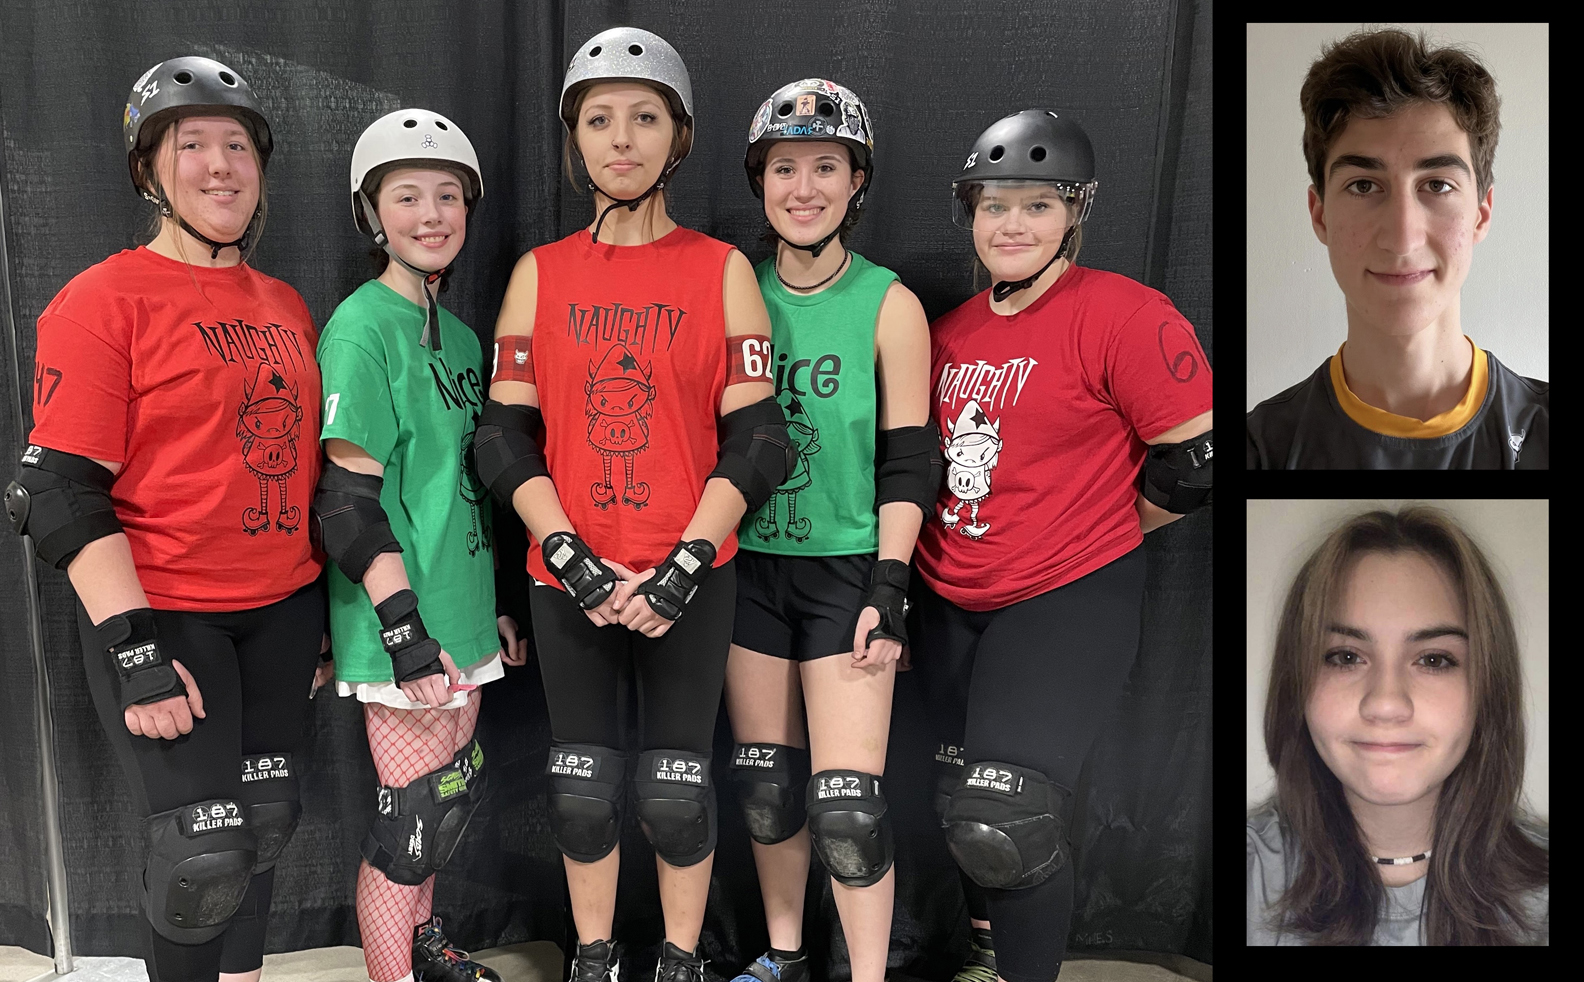 Edmonton roller derby team ranked as one of the top 50 in the world